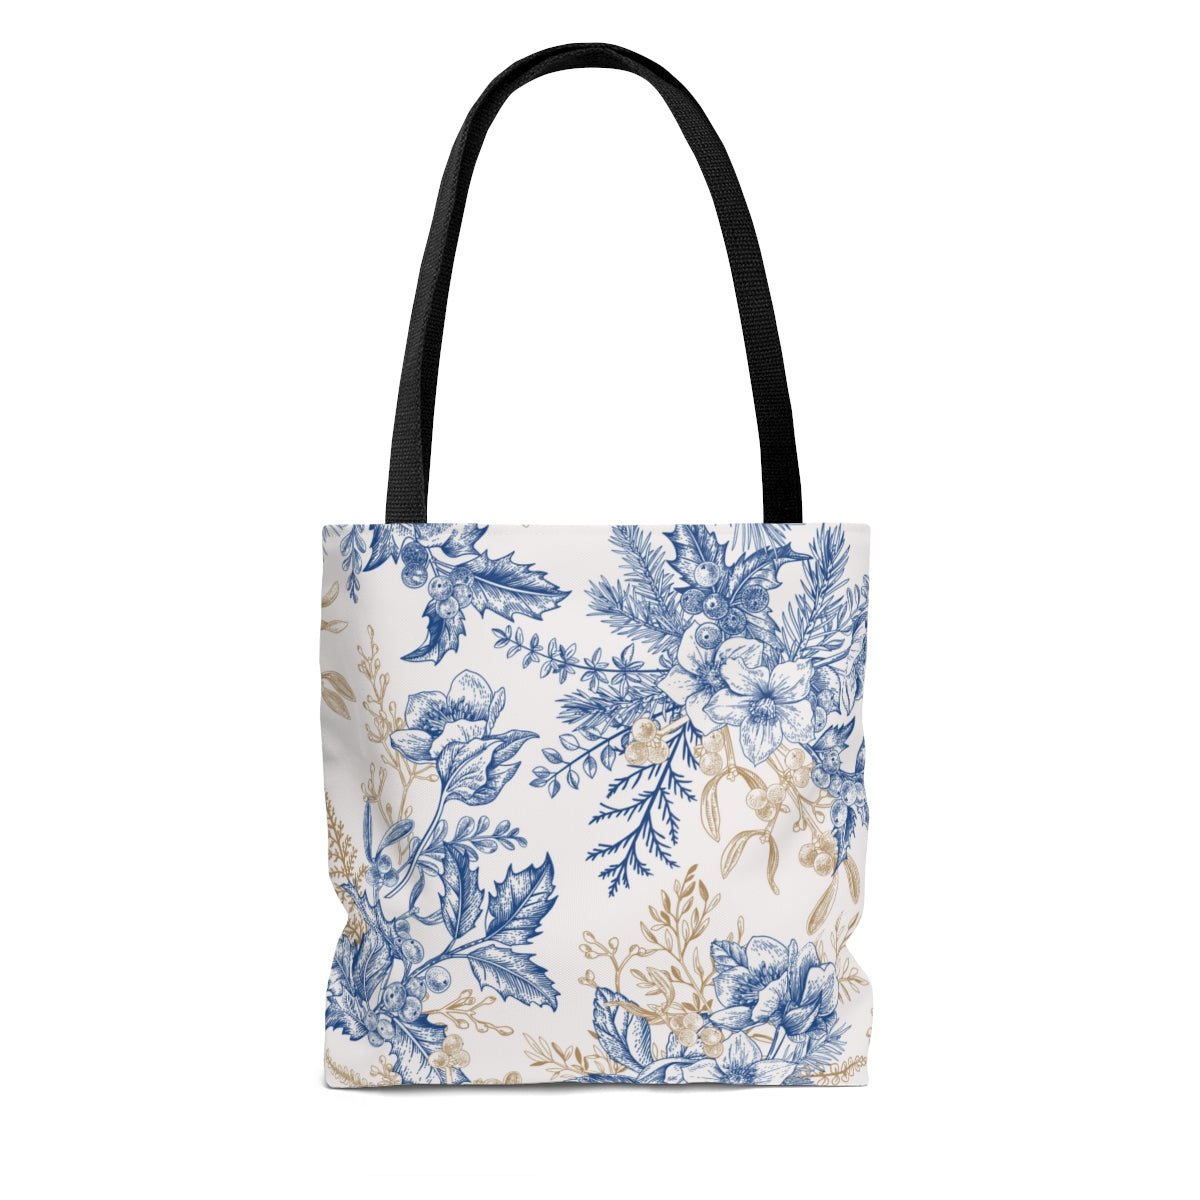 Winter Hellebore Flowers Tote Bag - Puffin Lime